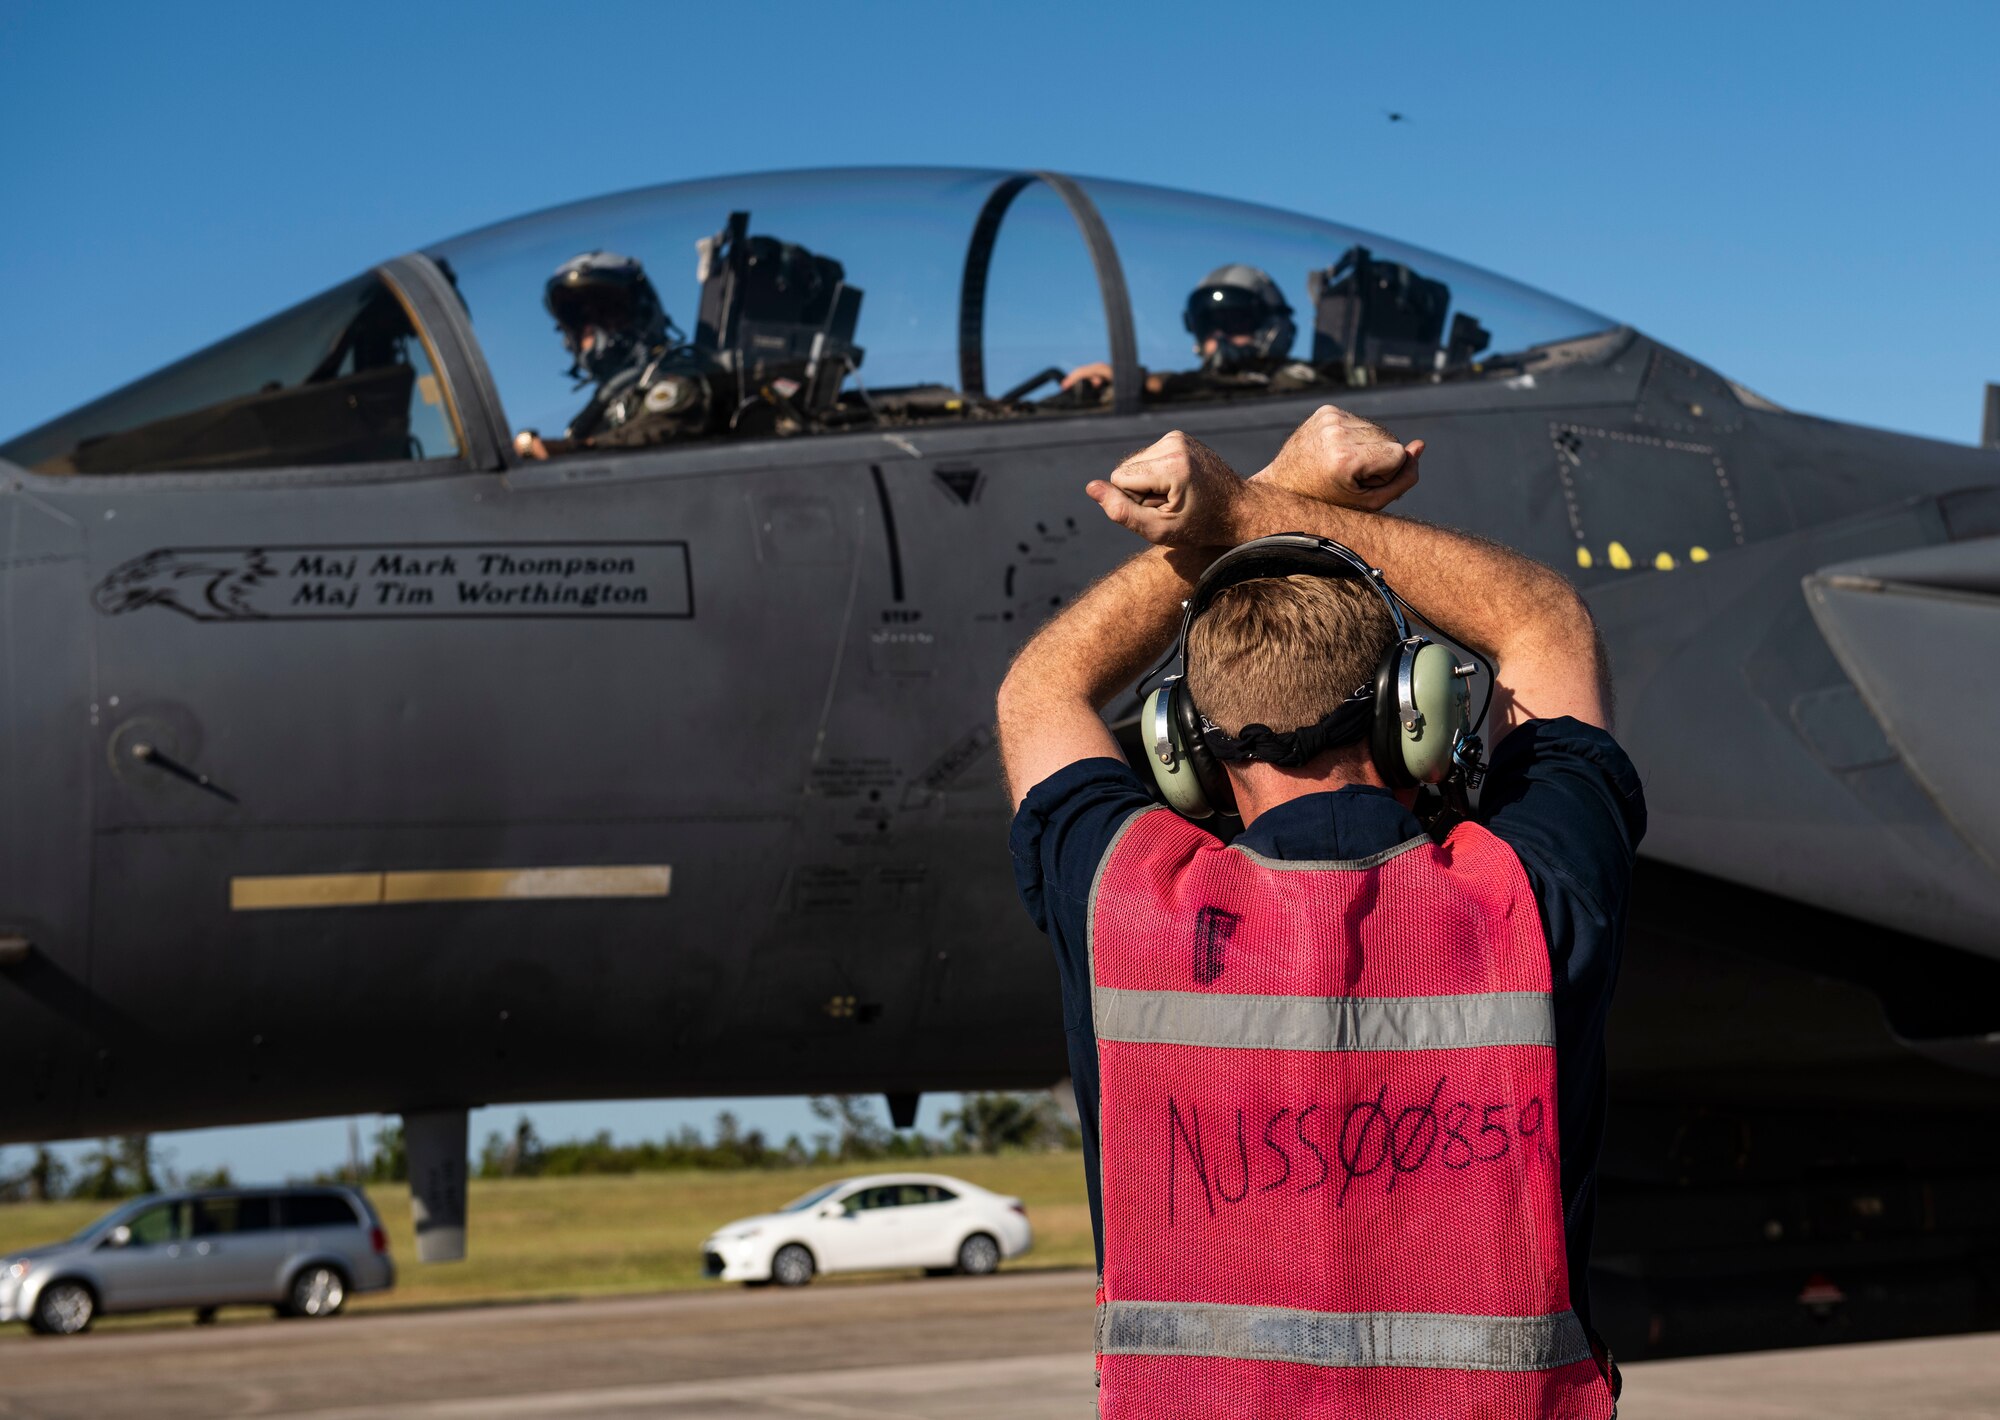 Staff Sgt. Samuel Walker, 757th Aircraft Maintenance Squadron (AMXS) tactical aircraft maintainer, prepares to launch out an F-15E Strike Eagle fighter jet during Combat Archer 19-12 on Tyndall Air Force Base, Fla., Sept. 24, 2019. The 757th AMXS supports flying operations for the U.S. Air Force Weapon School, 64th Aggressor Squadron and Test and Evaluation missions. (U.S. Air Force photo by Airman 1st Class Bailee A. Darbasie)